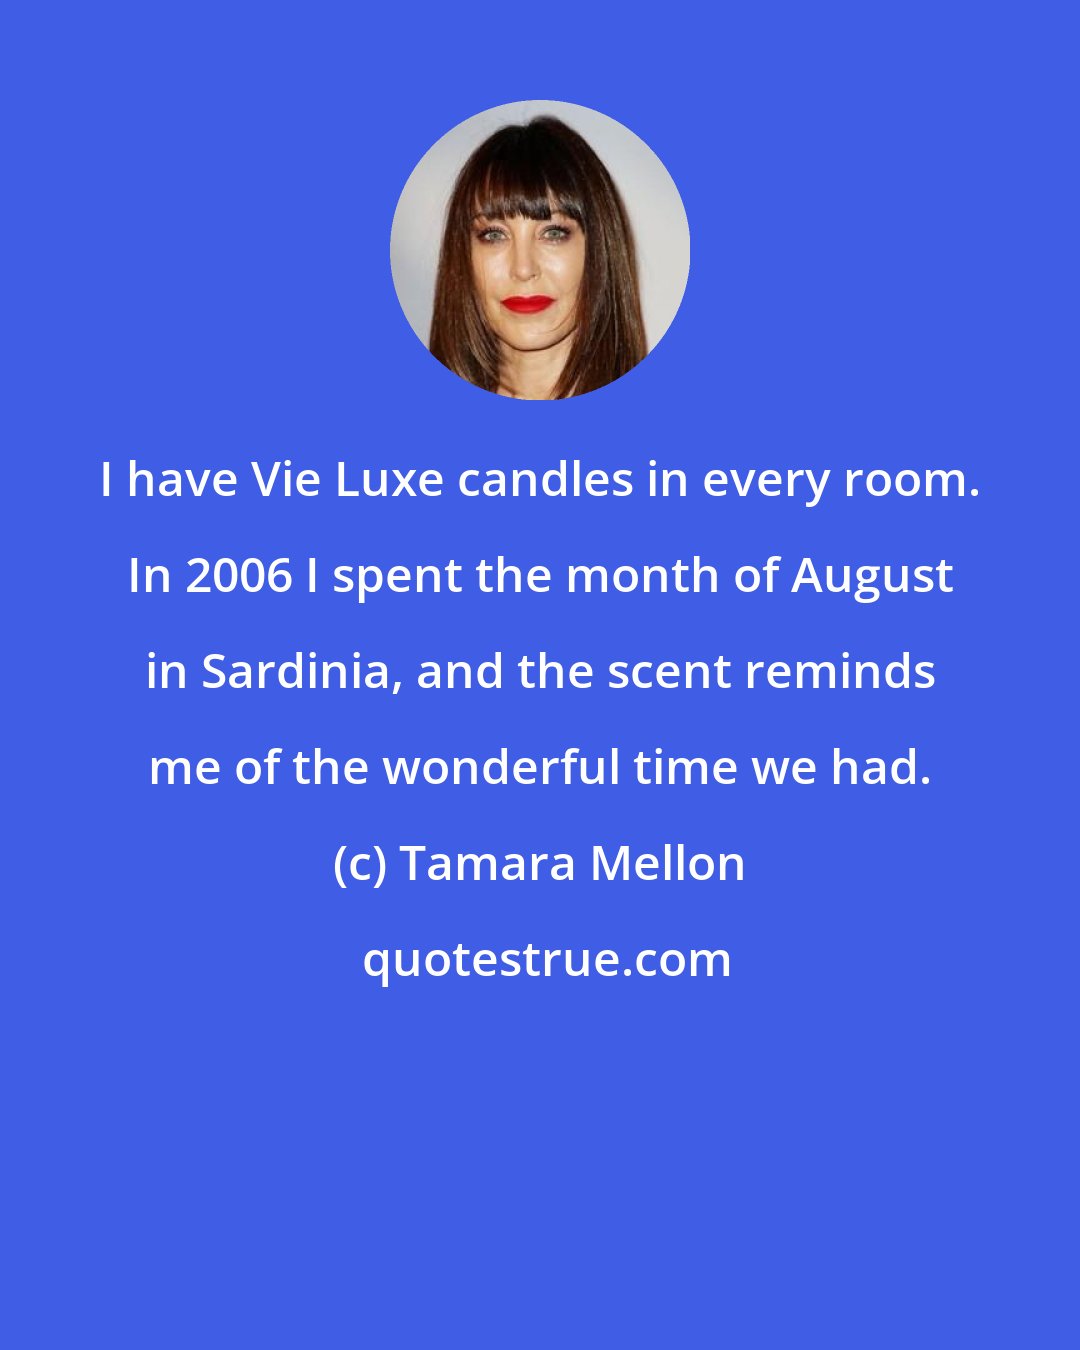 Tamara Mellon: I have Vie Luxe candles in every room. In 2006 I spent the month of August in Sardinia, and the scent reminds me of the wonderful time we had.